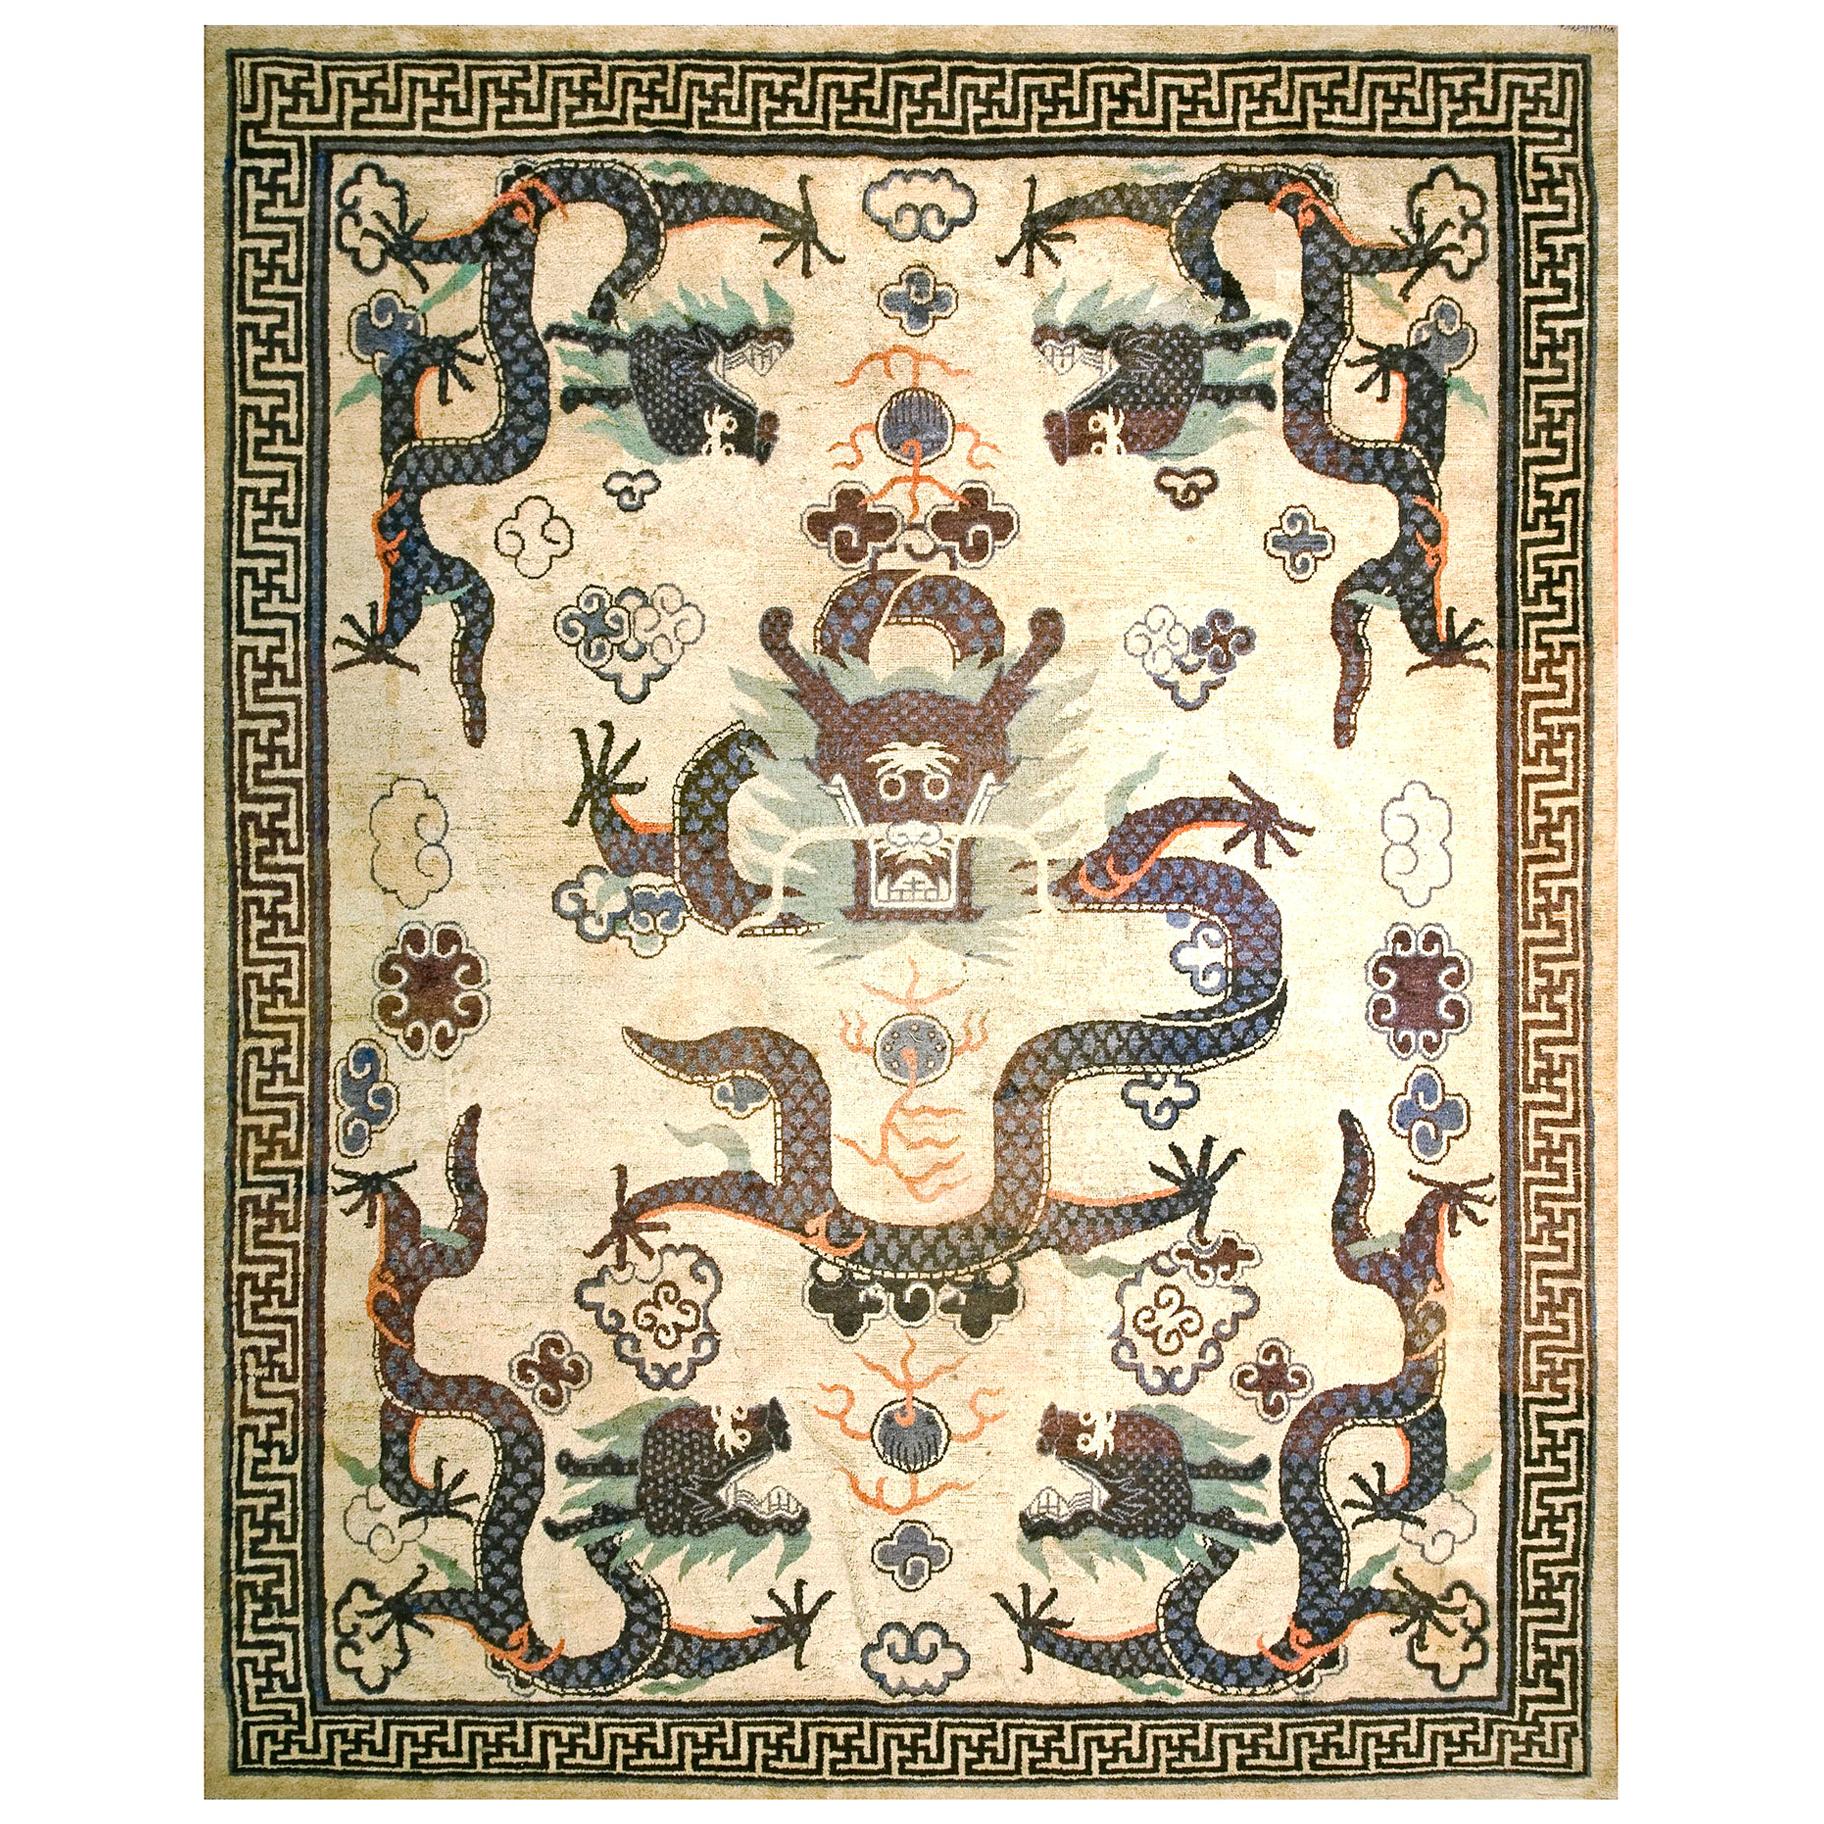 19th Century Chinese Mongolian Dragon Carpet  ( 9'8" x 12' - 295 x 365 ) For Sale